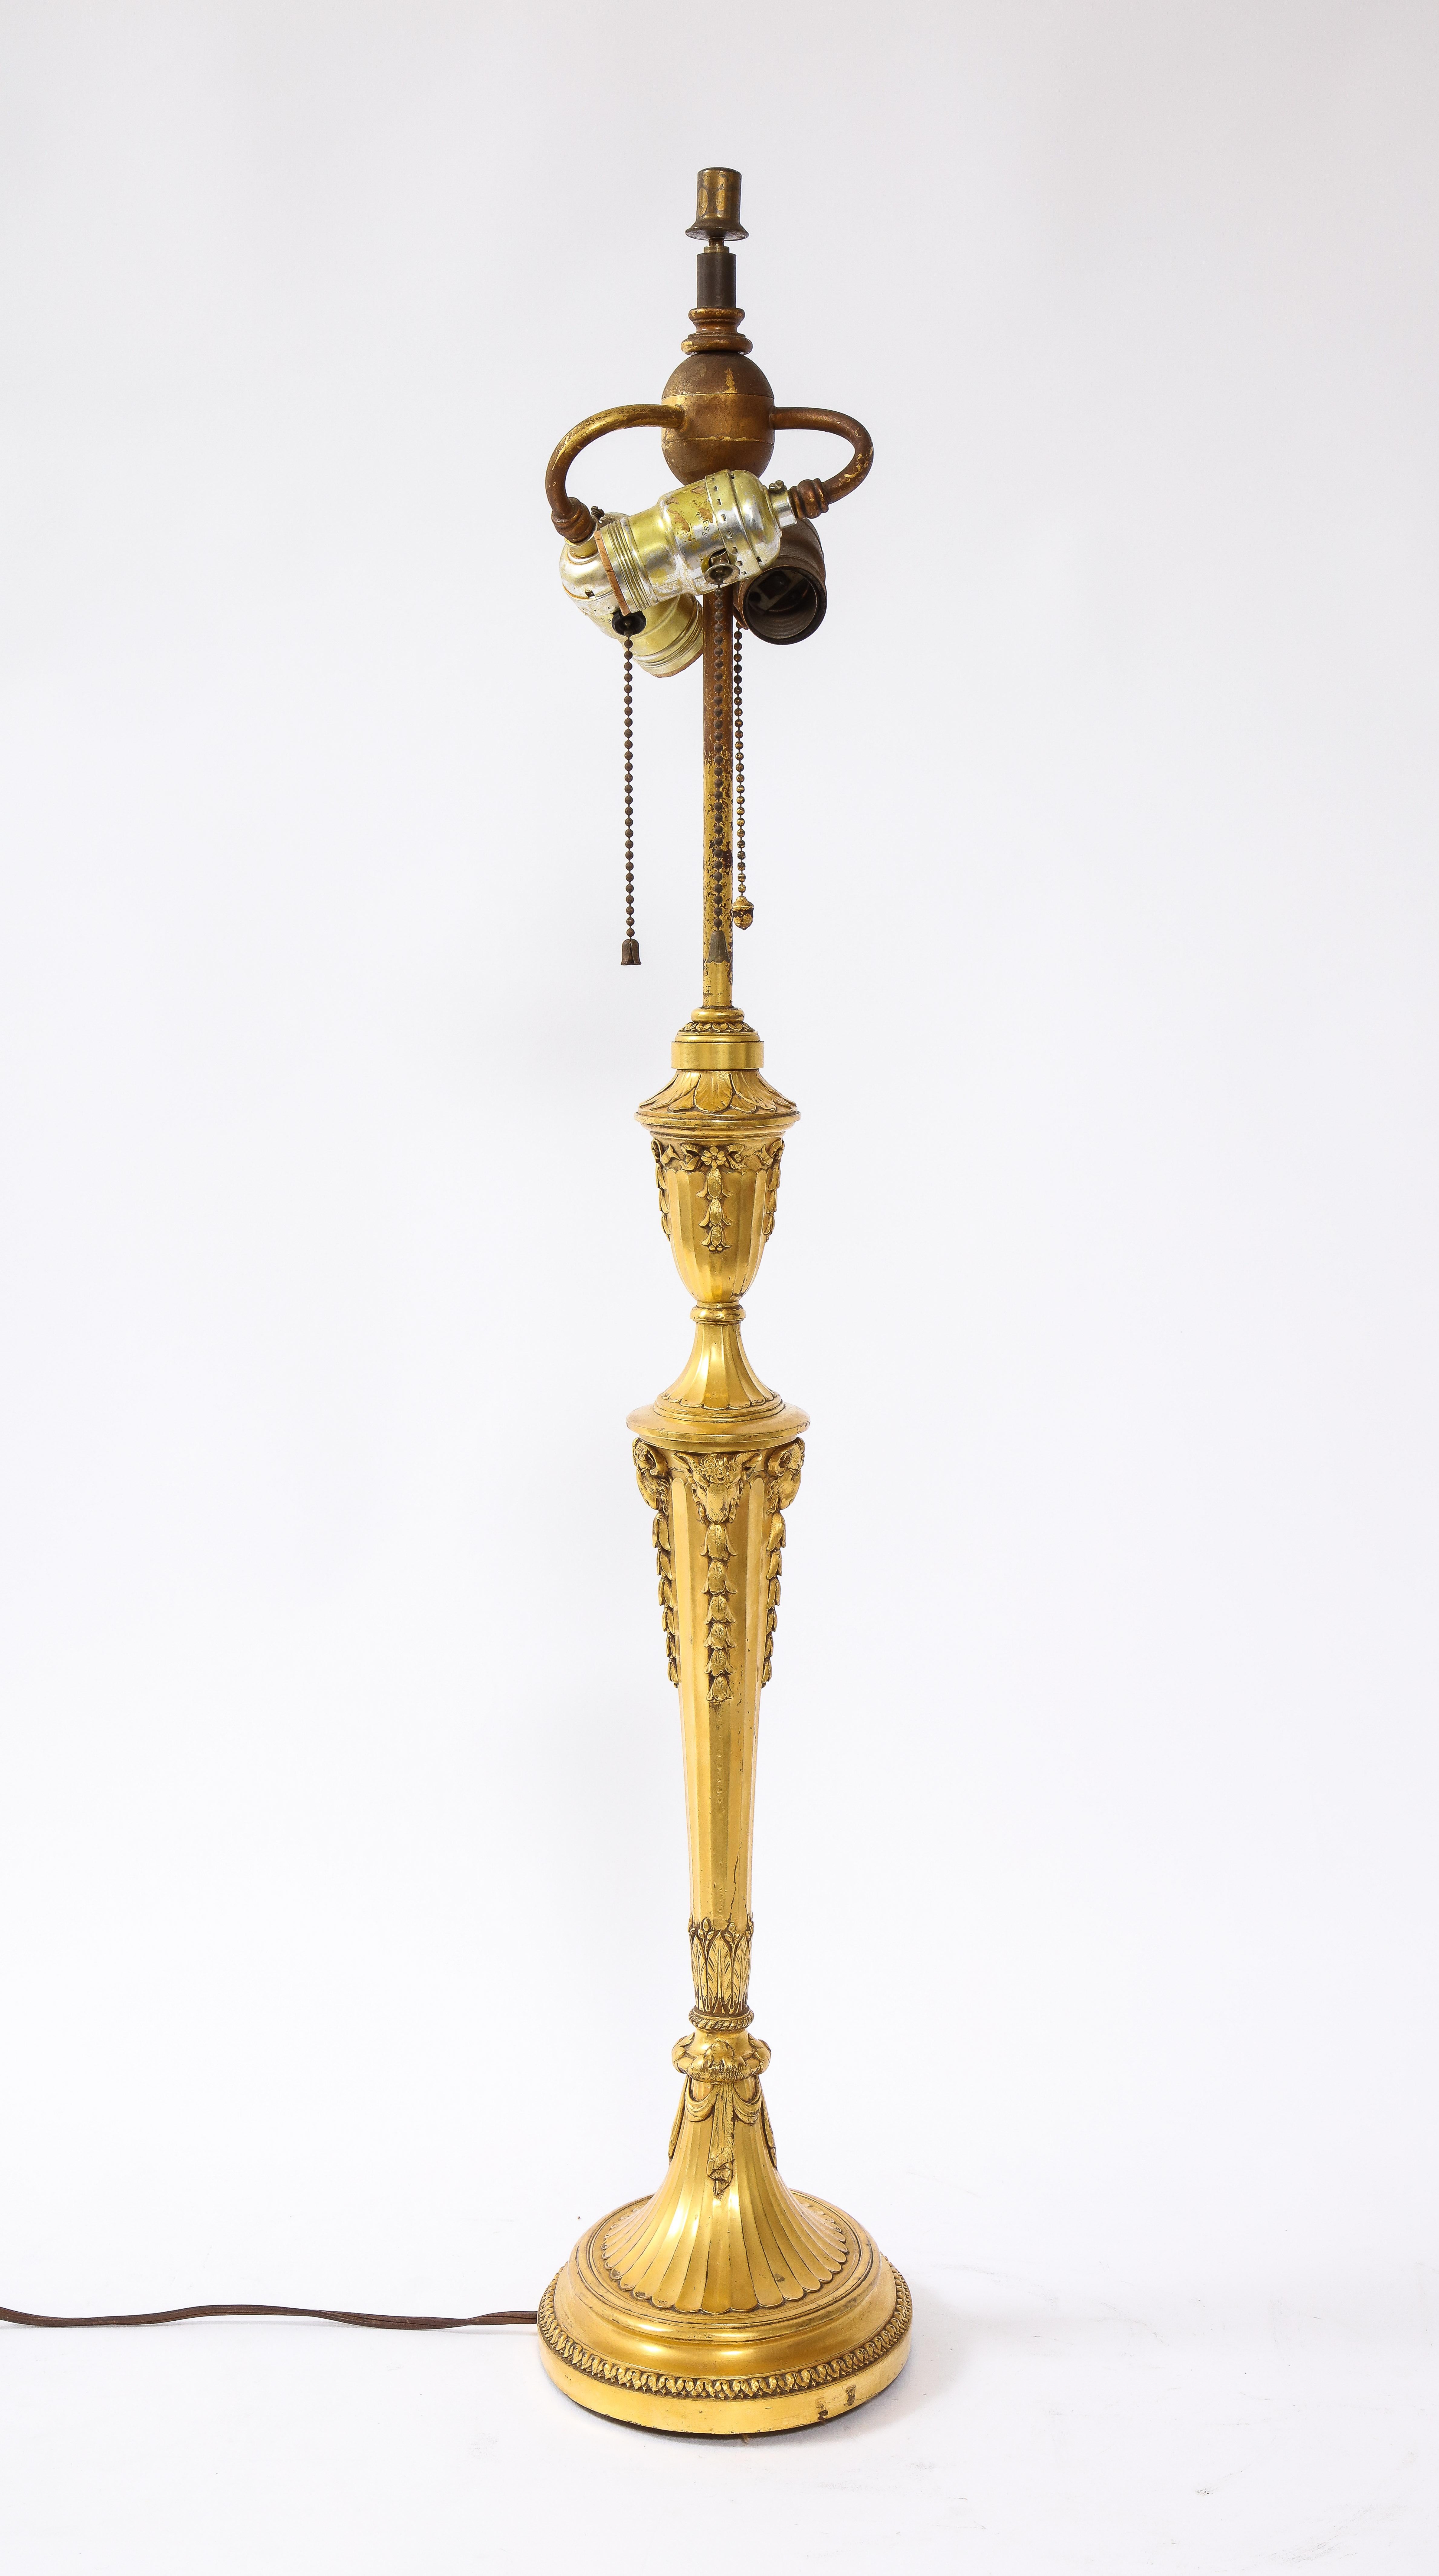 A fantastic 19th century Caldwell Louis XVI style dore bronze candlestick lamp. Beautifully hand-chassed, hand-chiseled with two-tone matte and burnished gold, this lamp is perfect to brighten up any desk or nightstand. It is of gorgeous quality,